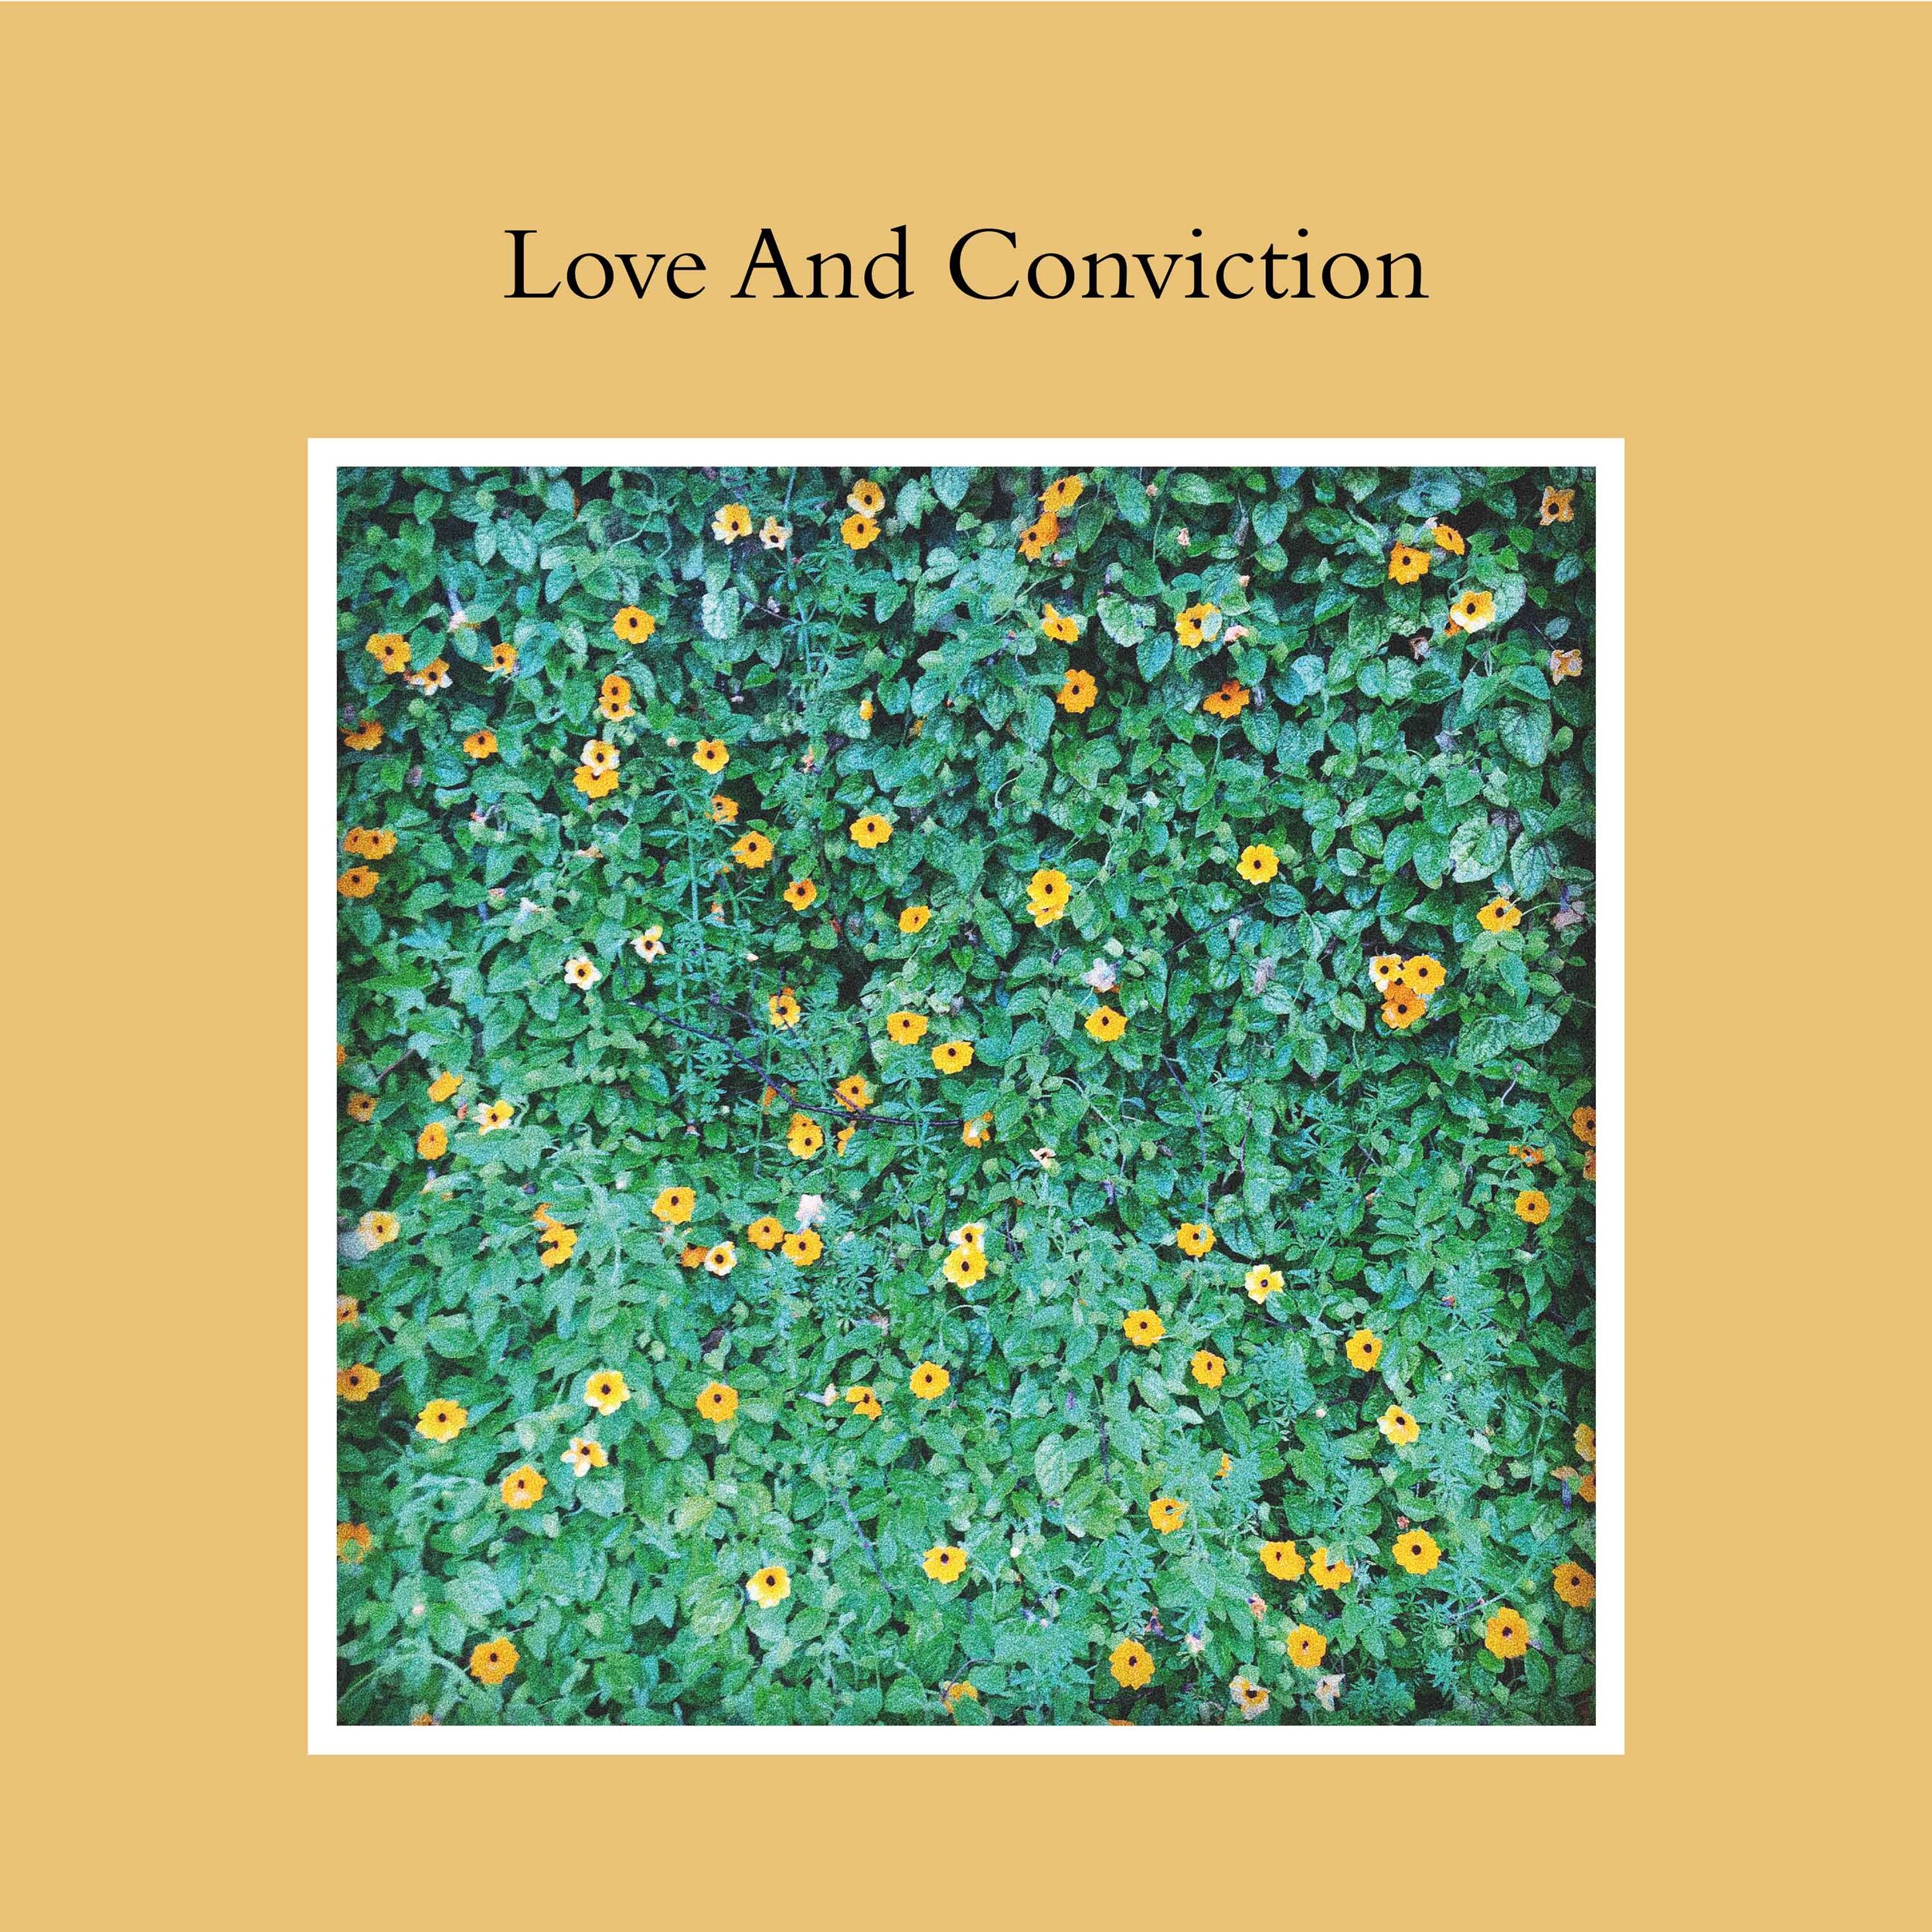 02-Love-And-Conviction.jpg